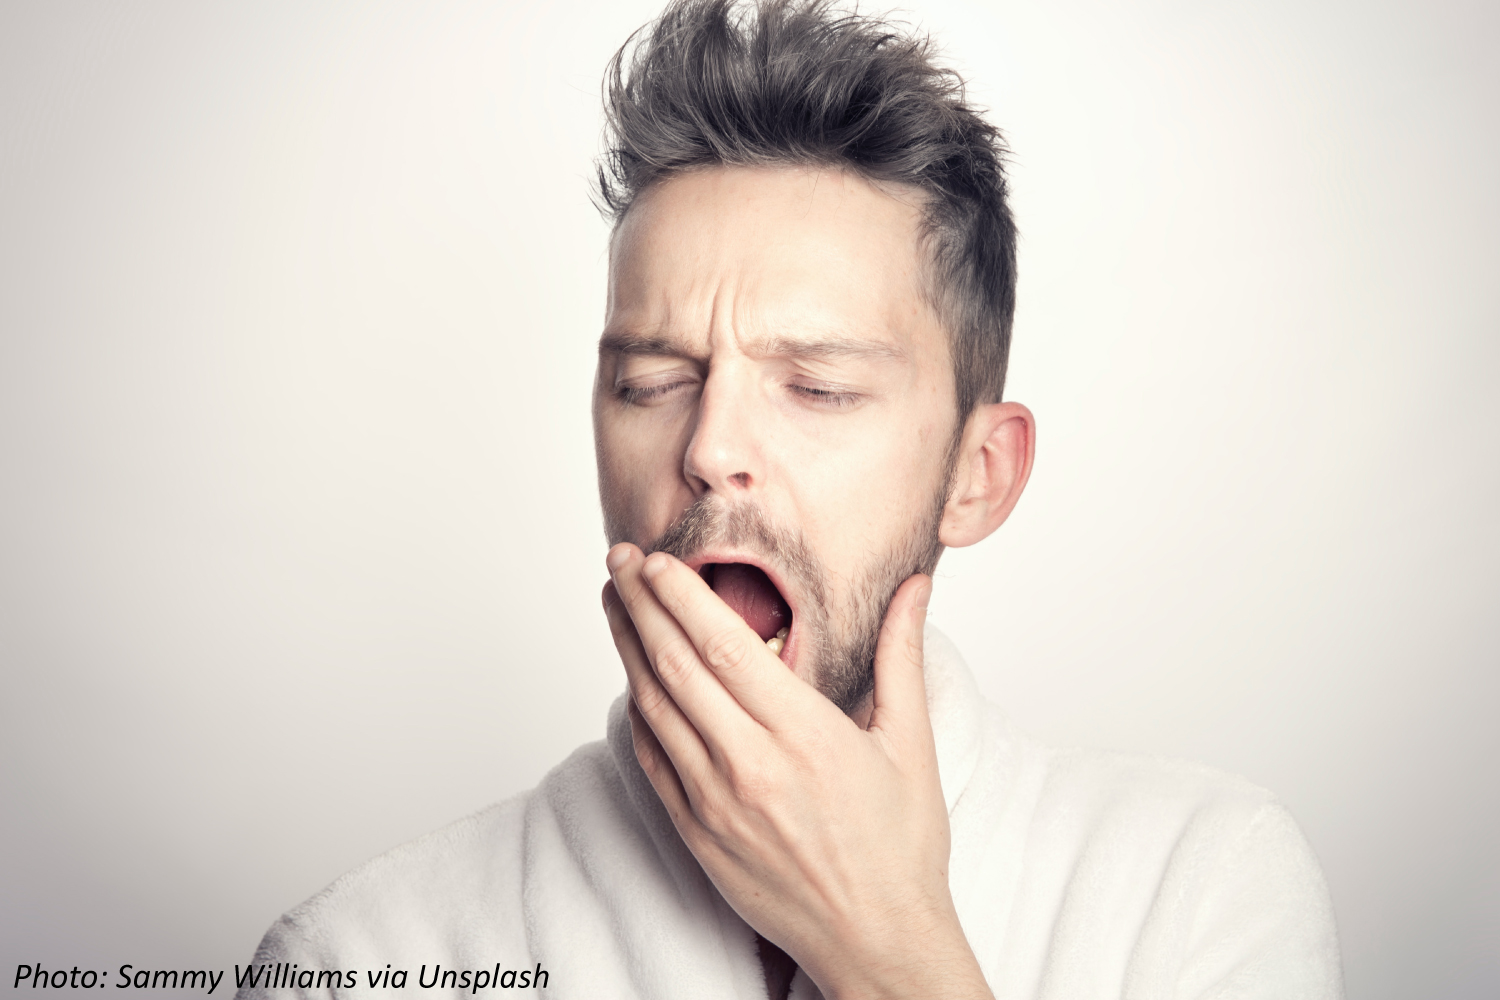 The Next Time You Yawn…